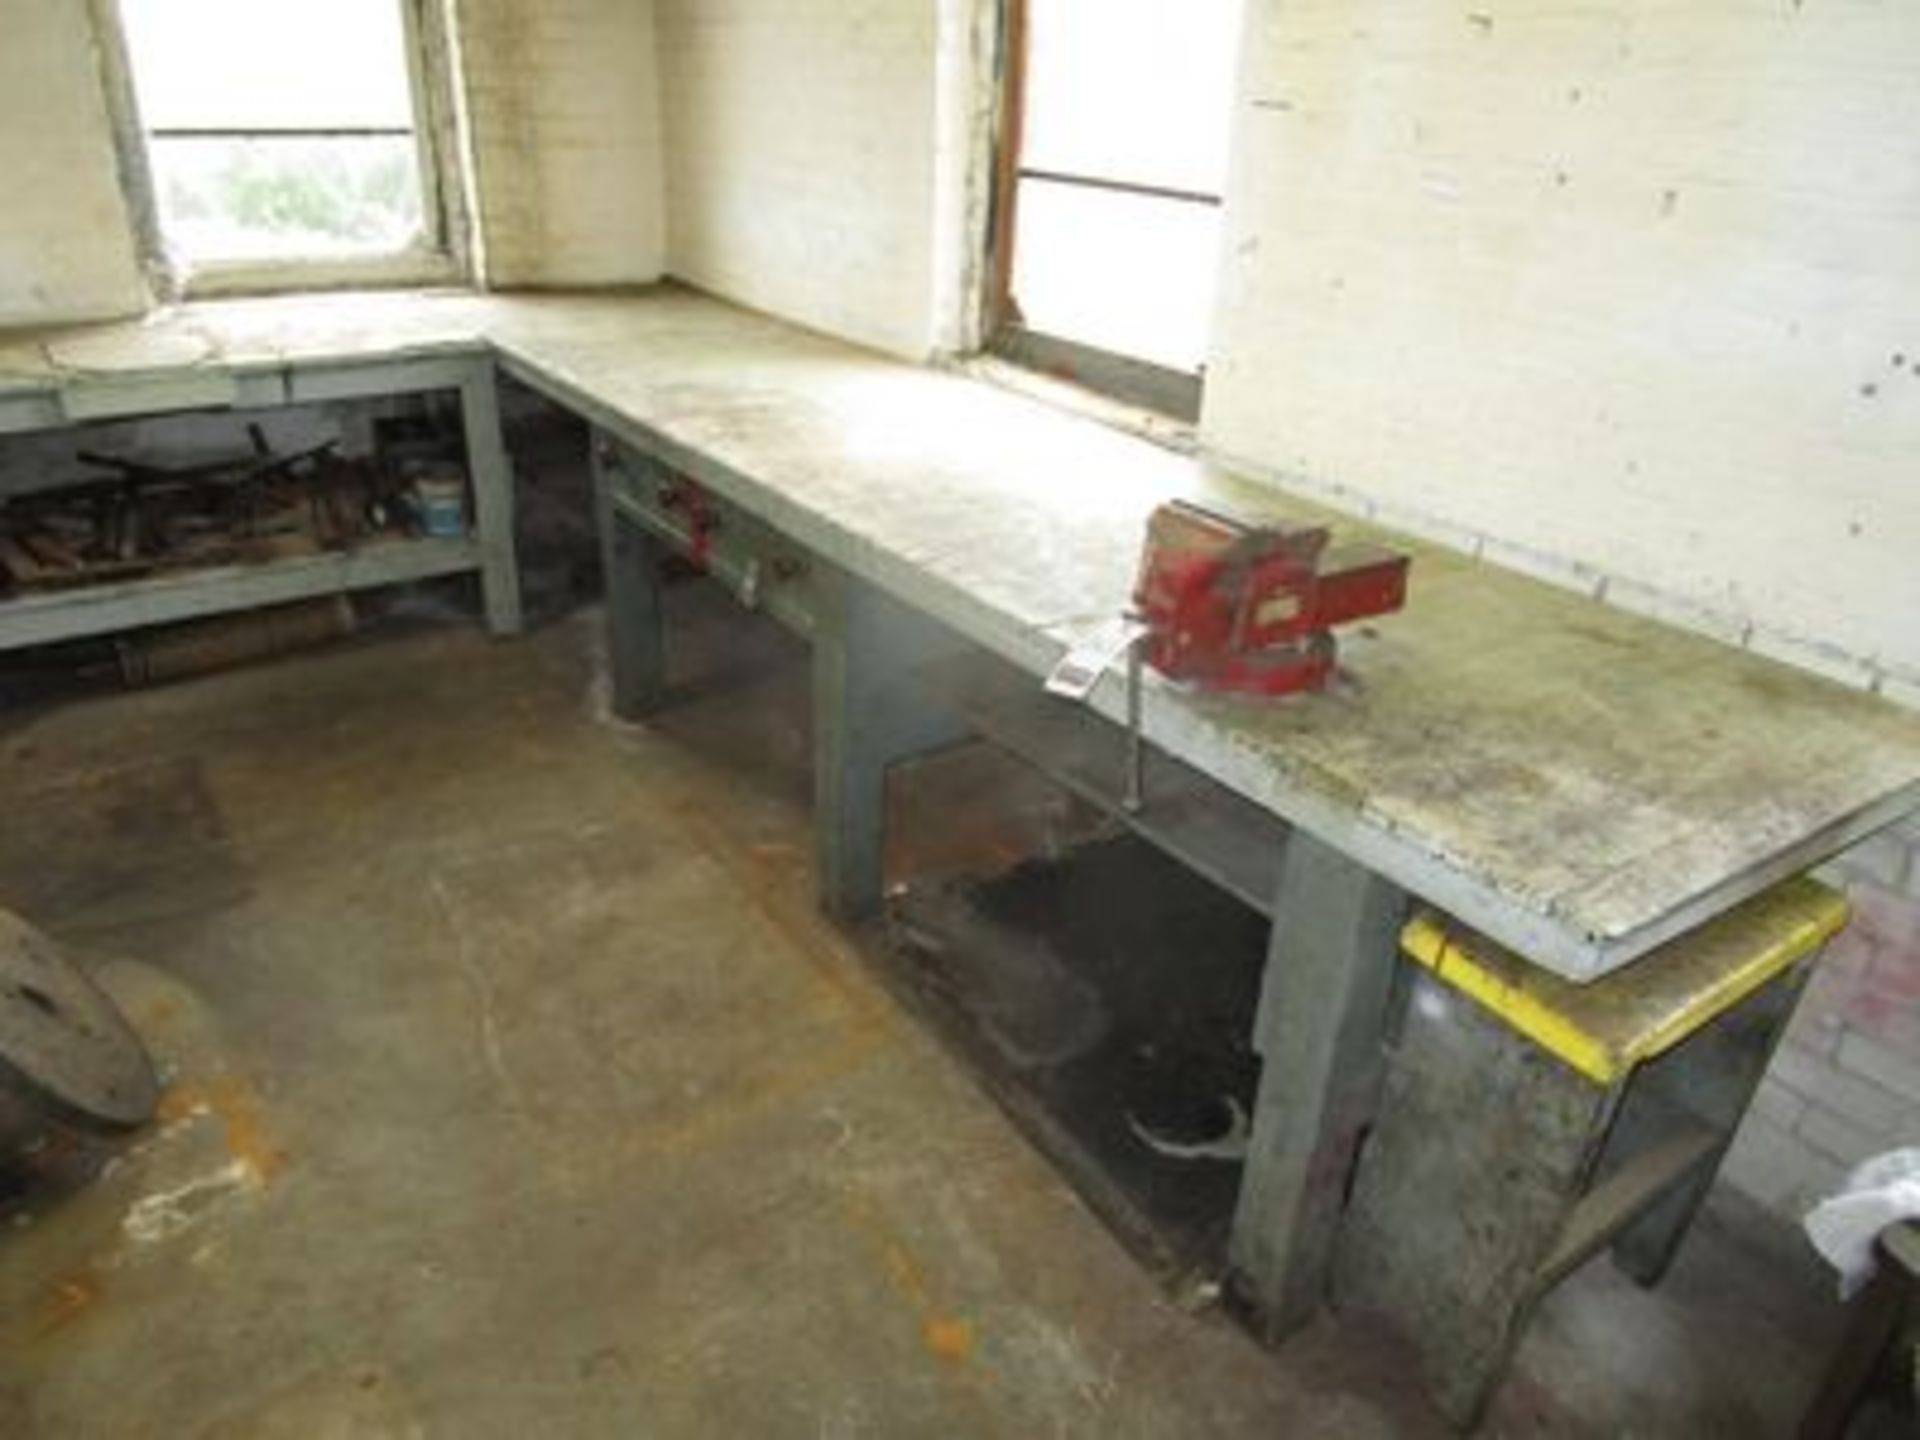 12'X10' "L" SHAPED WOODEN WORKTABLE W/ ENCO 6" SWIVEL BENCH VISE & CONTENTS